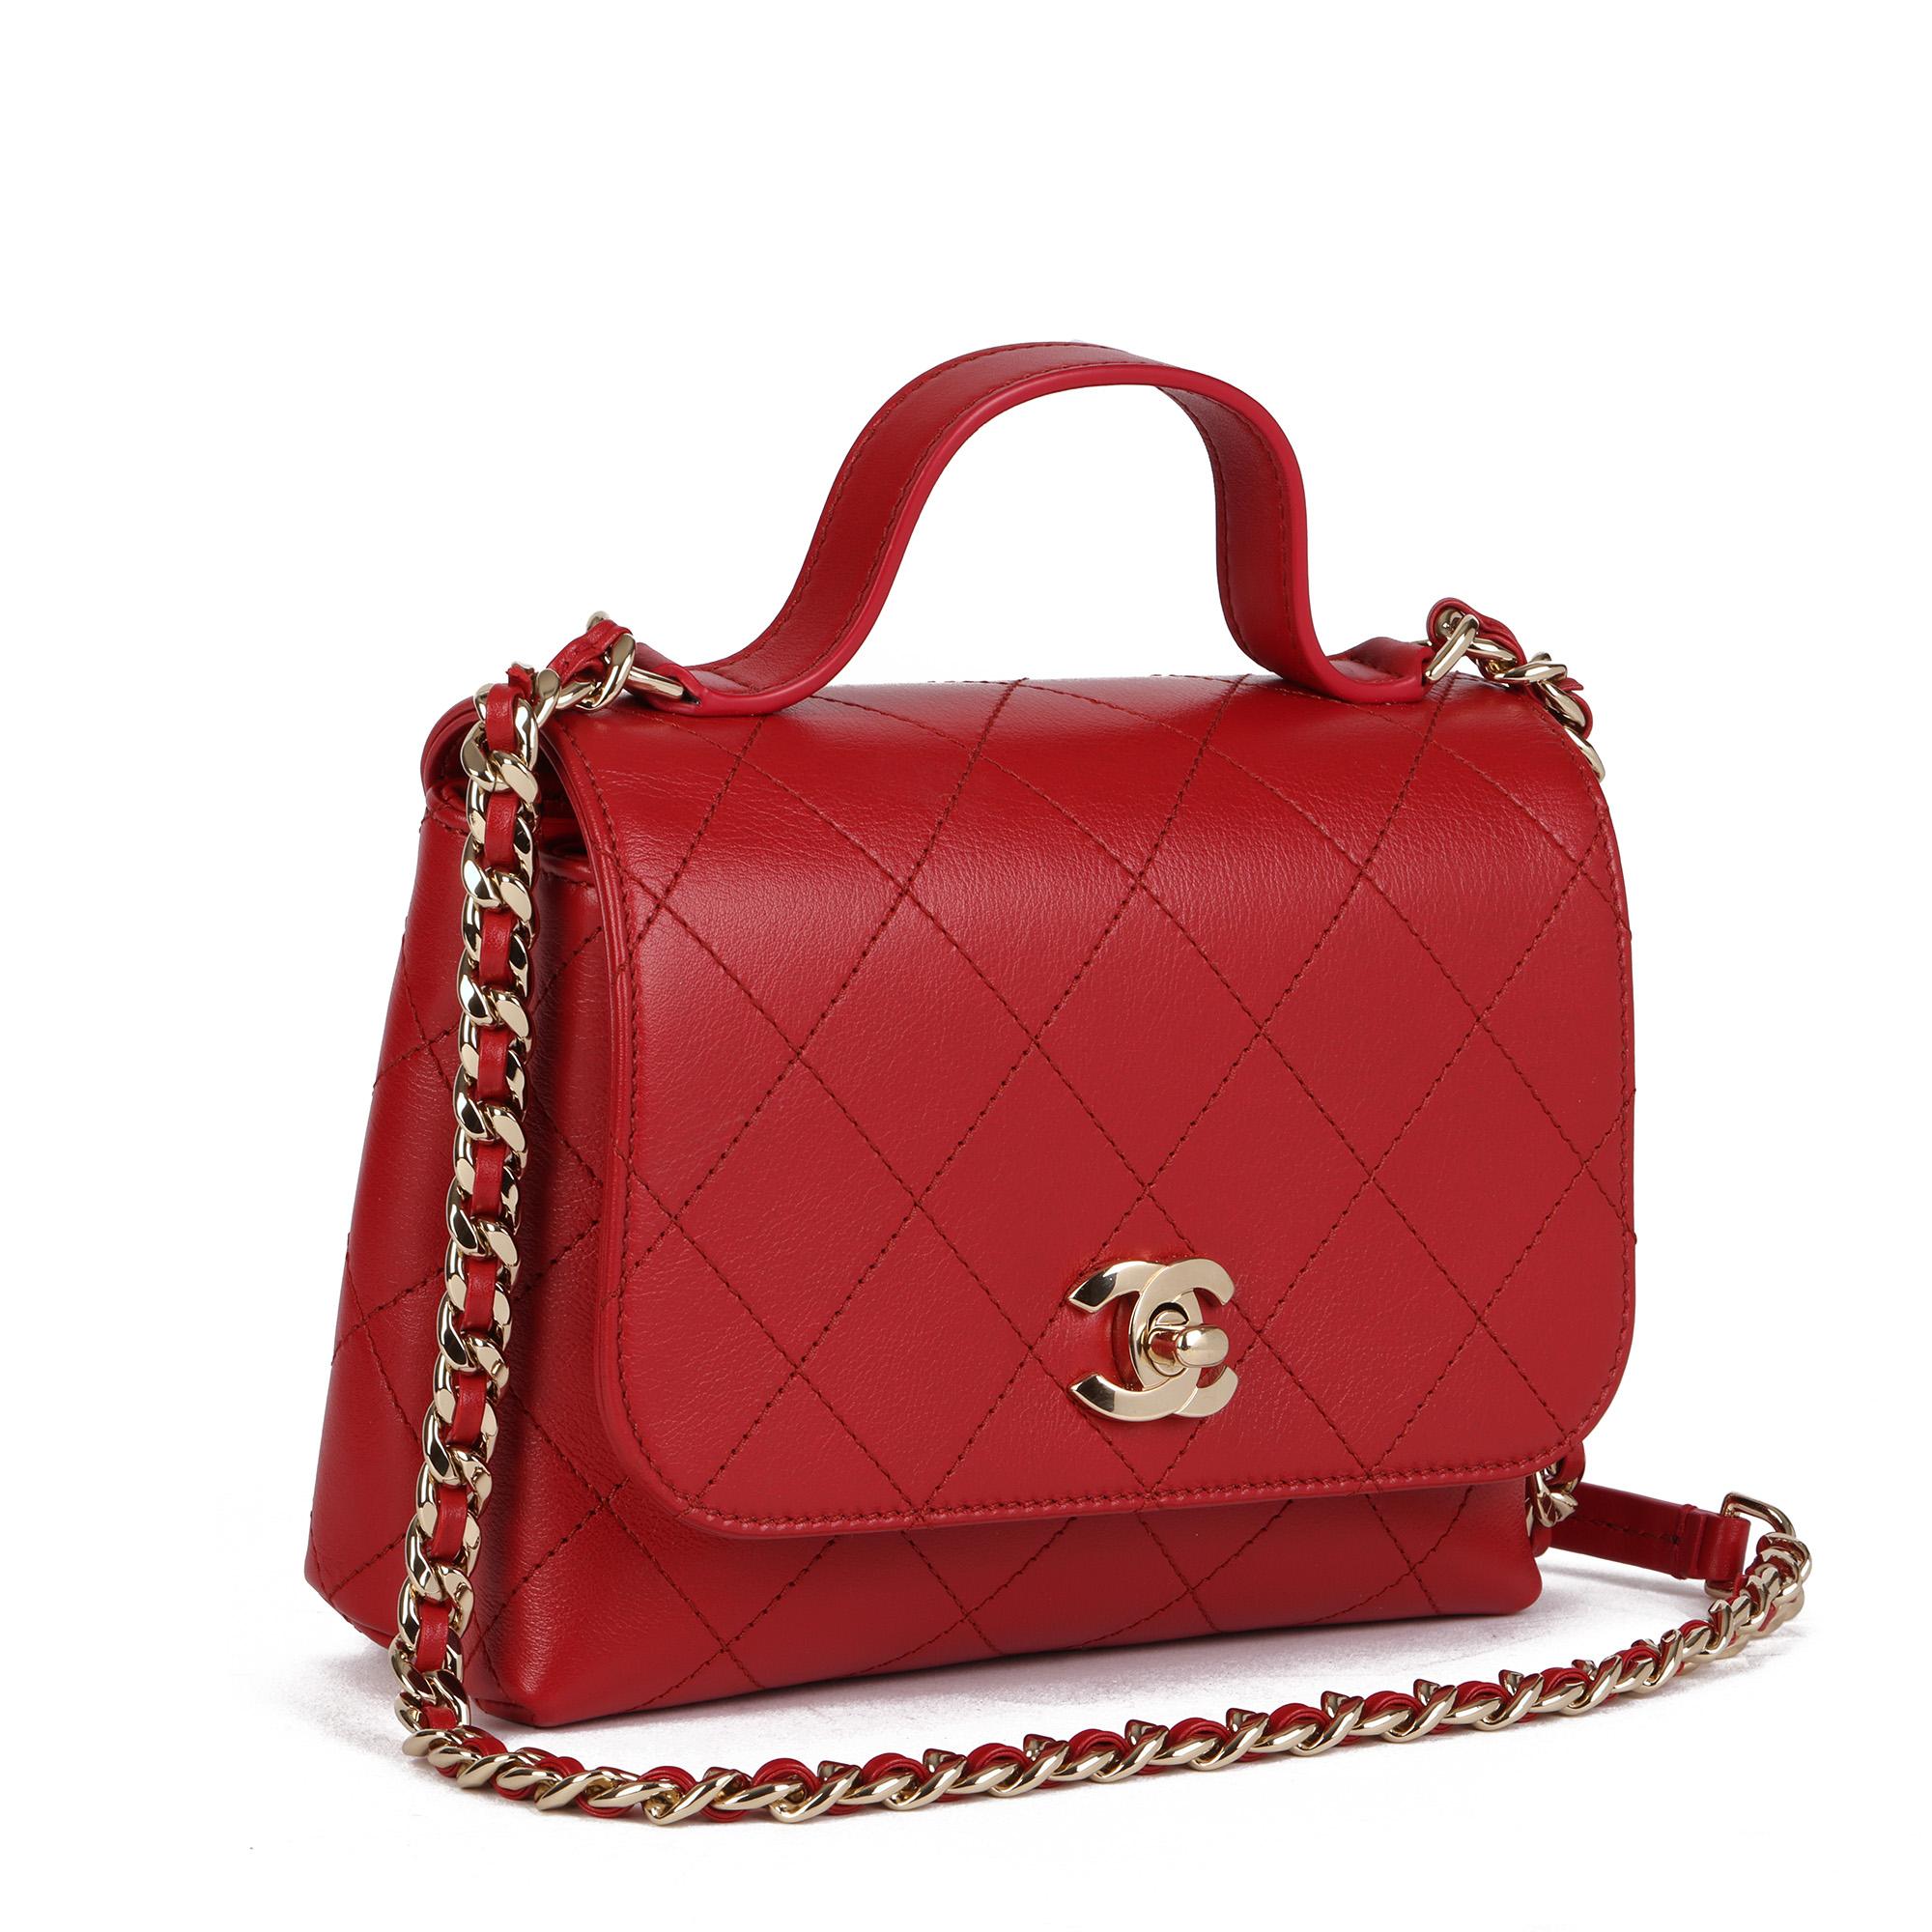 CHANEL
Red Quilted Lambskin Mini Classic Top Handle Flap Bag

Serial Number: 28420757
Age (Circa): 2021
Accompanied By: Chanel Dust Bag, Box, Care Booklet, Selfridges Receipt, Authenticity Card
Authenticity Details: Authenticity Card, Serial Sticker